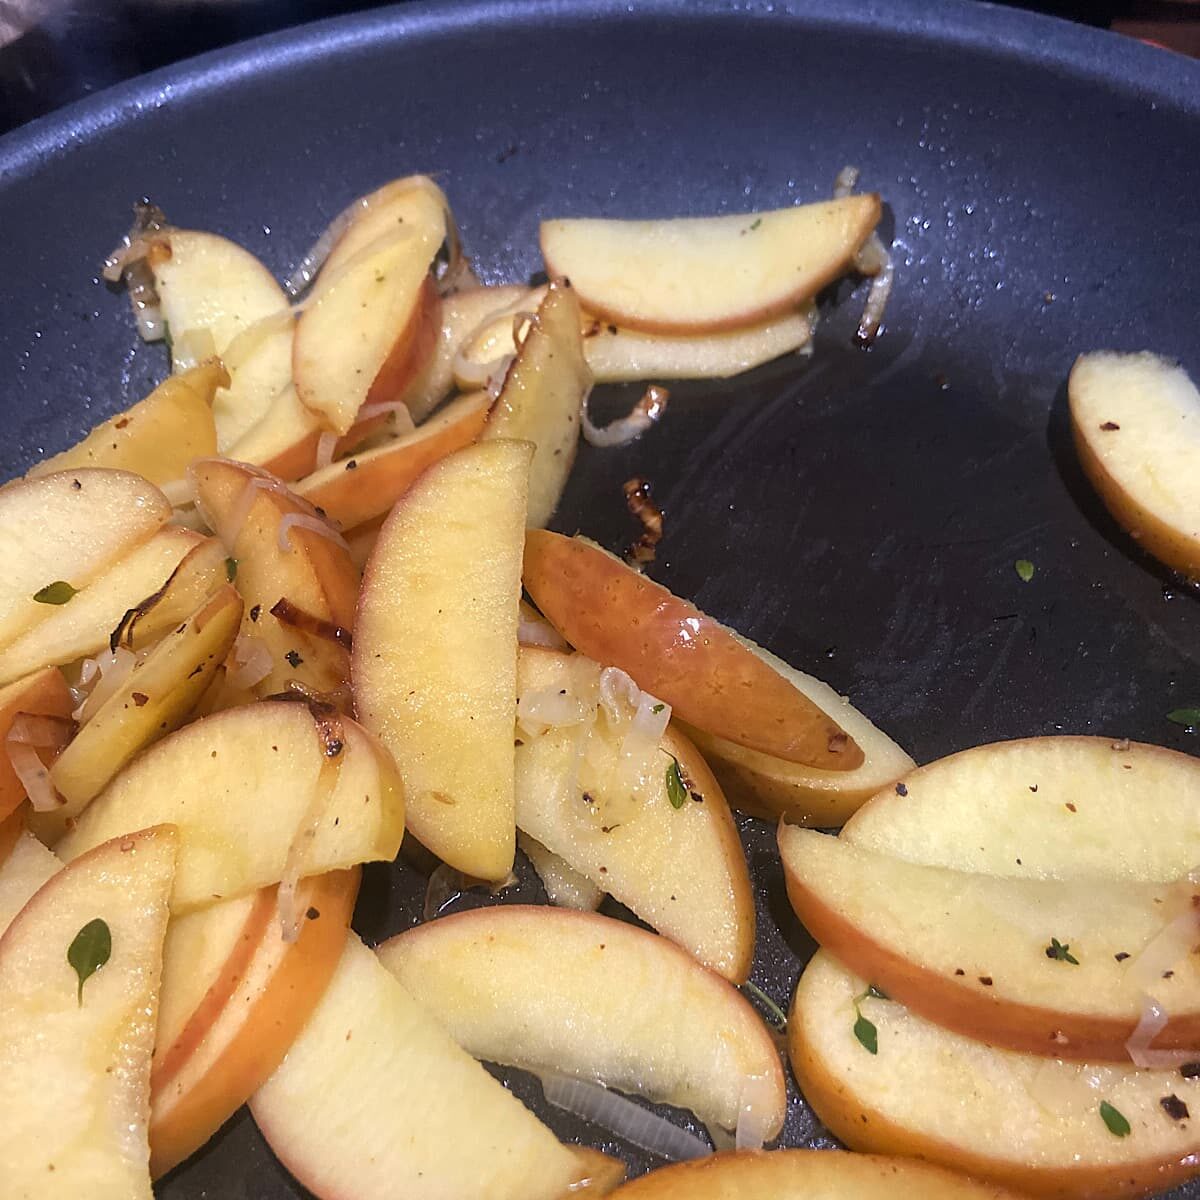 Add sliced apples and spices.